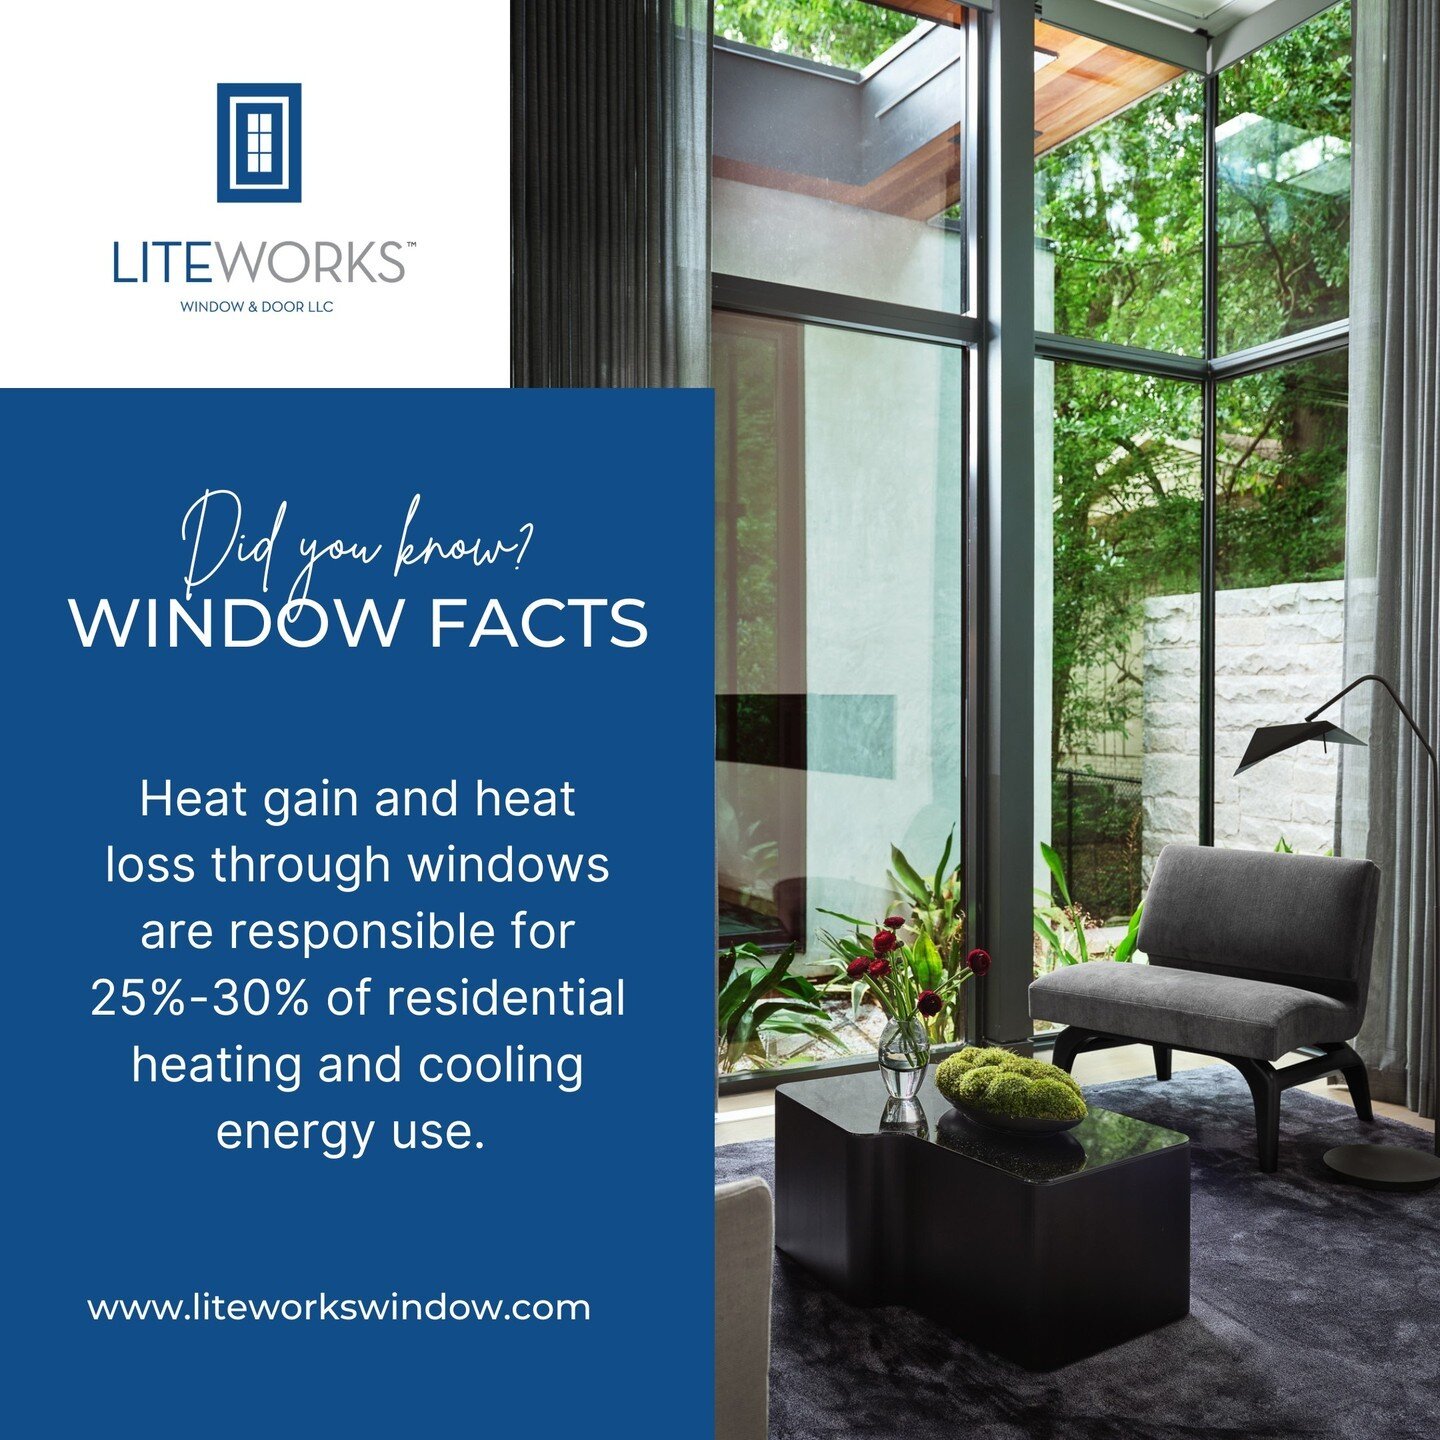 Winters are cold, and summers are hot. Liteworks helps you choose the most efficient windows for your home for any climate. Take the necessary steps to make your home more comfortable and save money on energy bills by contacting one of our salespeopl